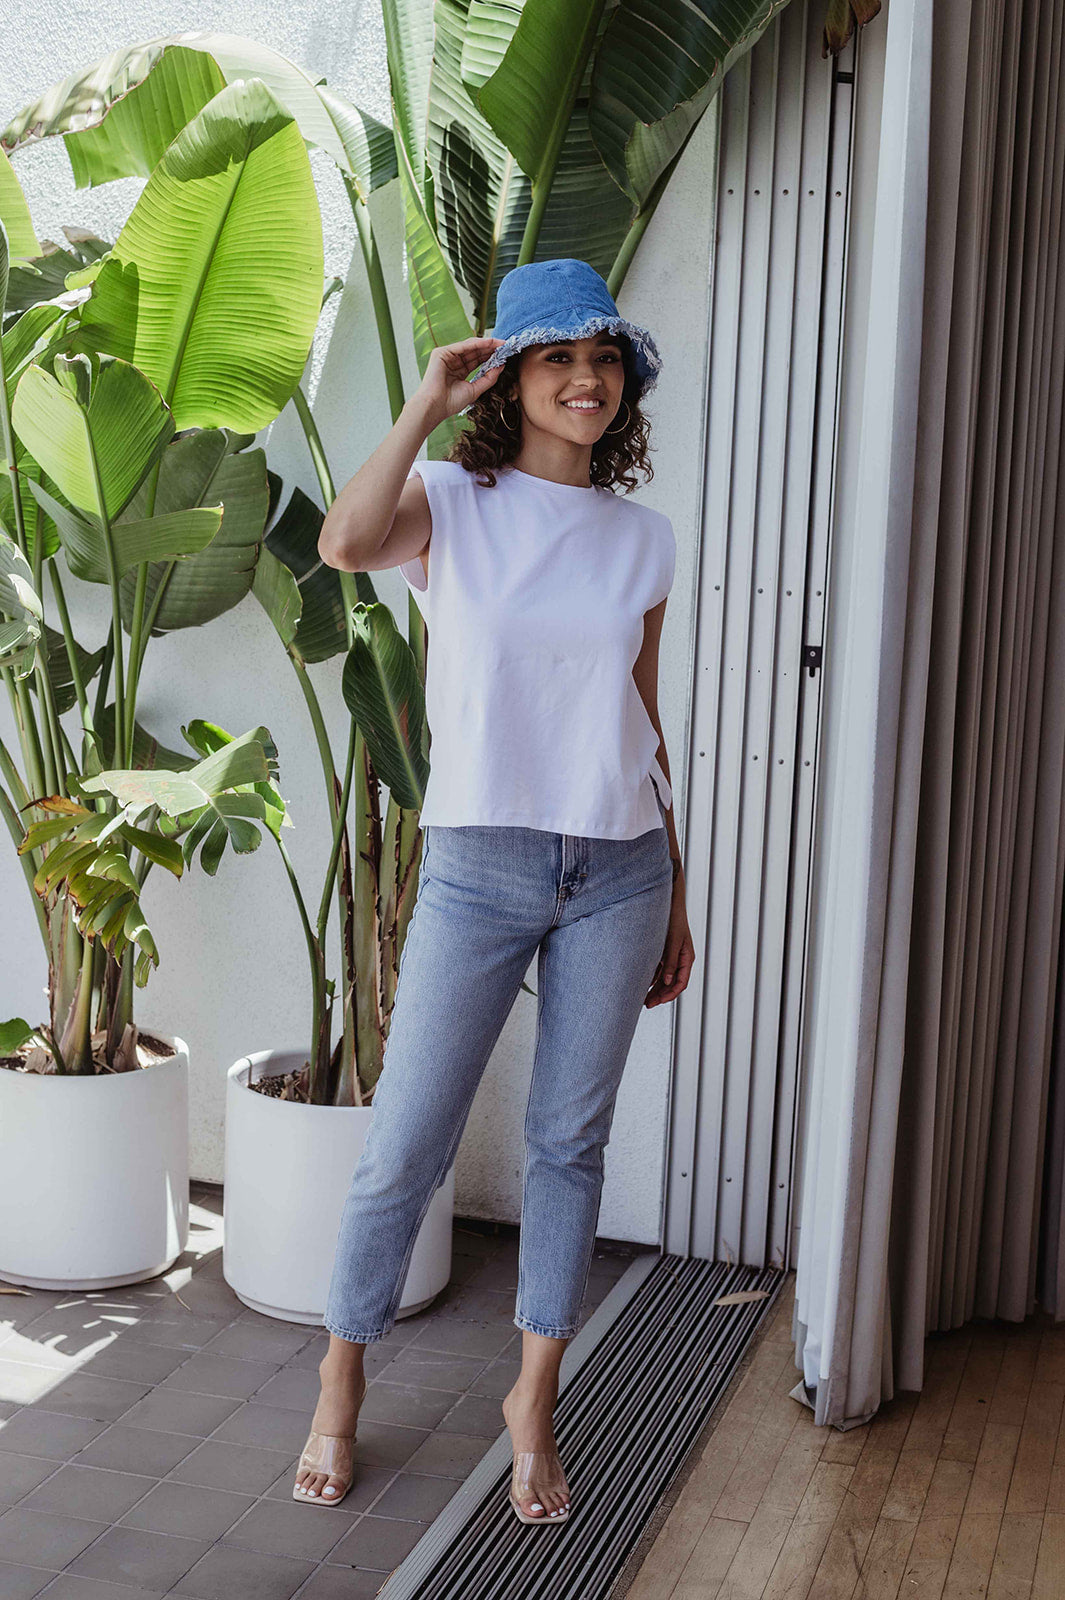 White Cotton Tshirt with Shoulder Pads - FINAL SALE